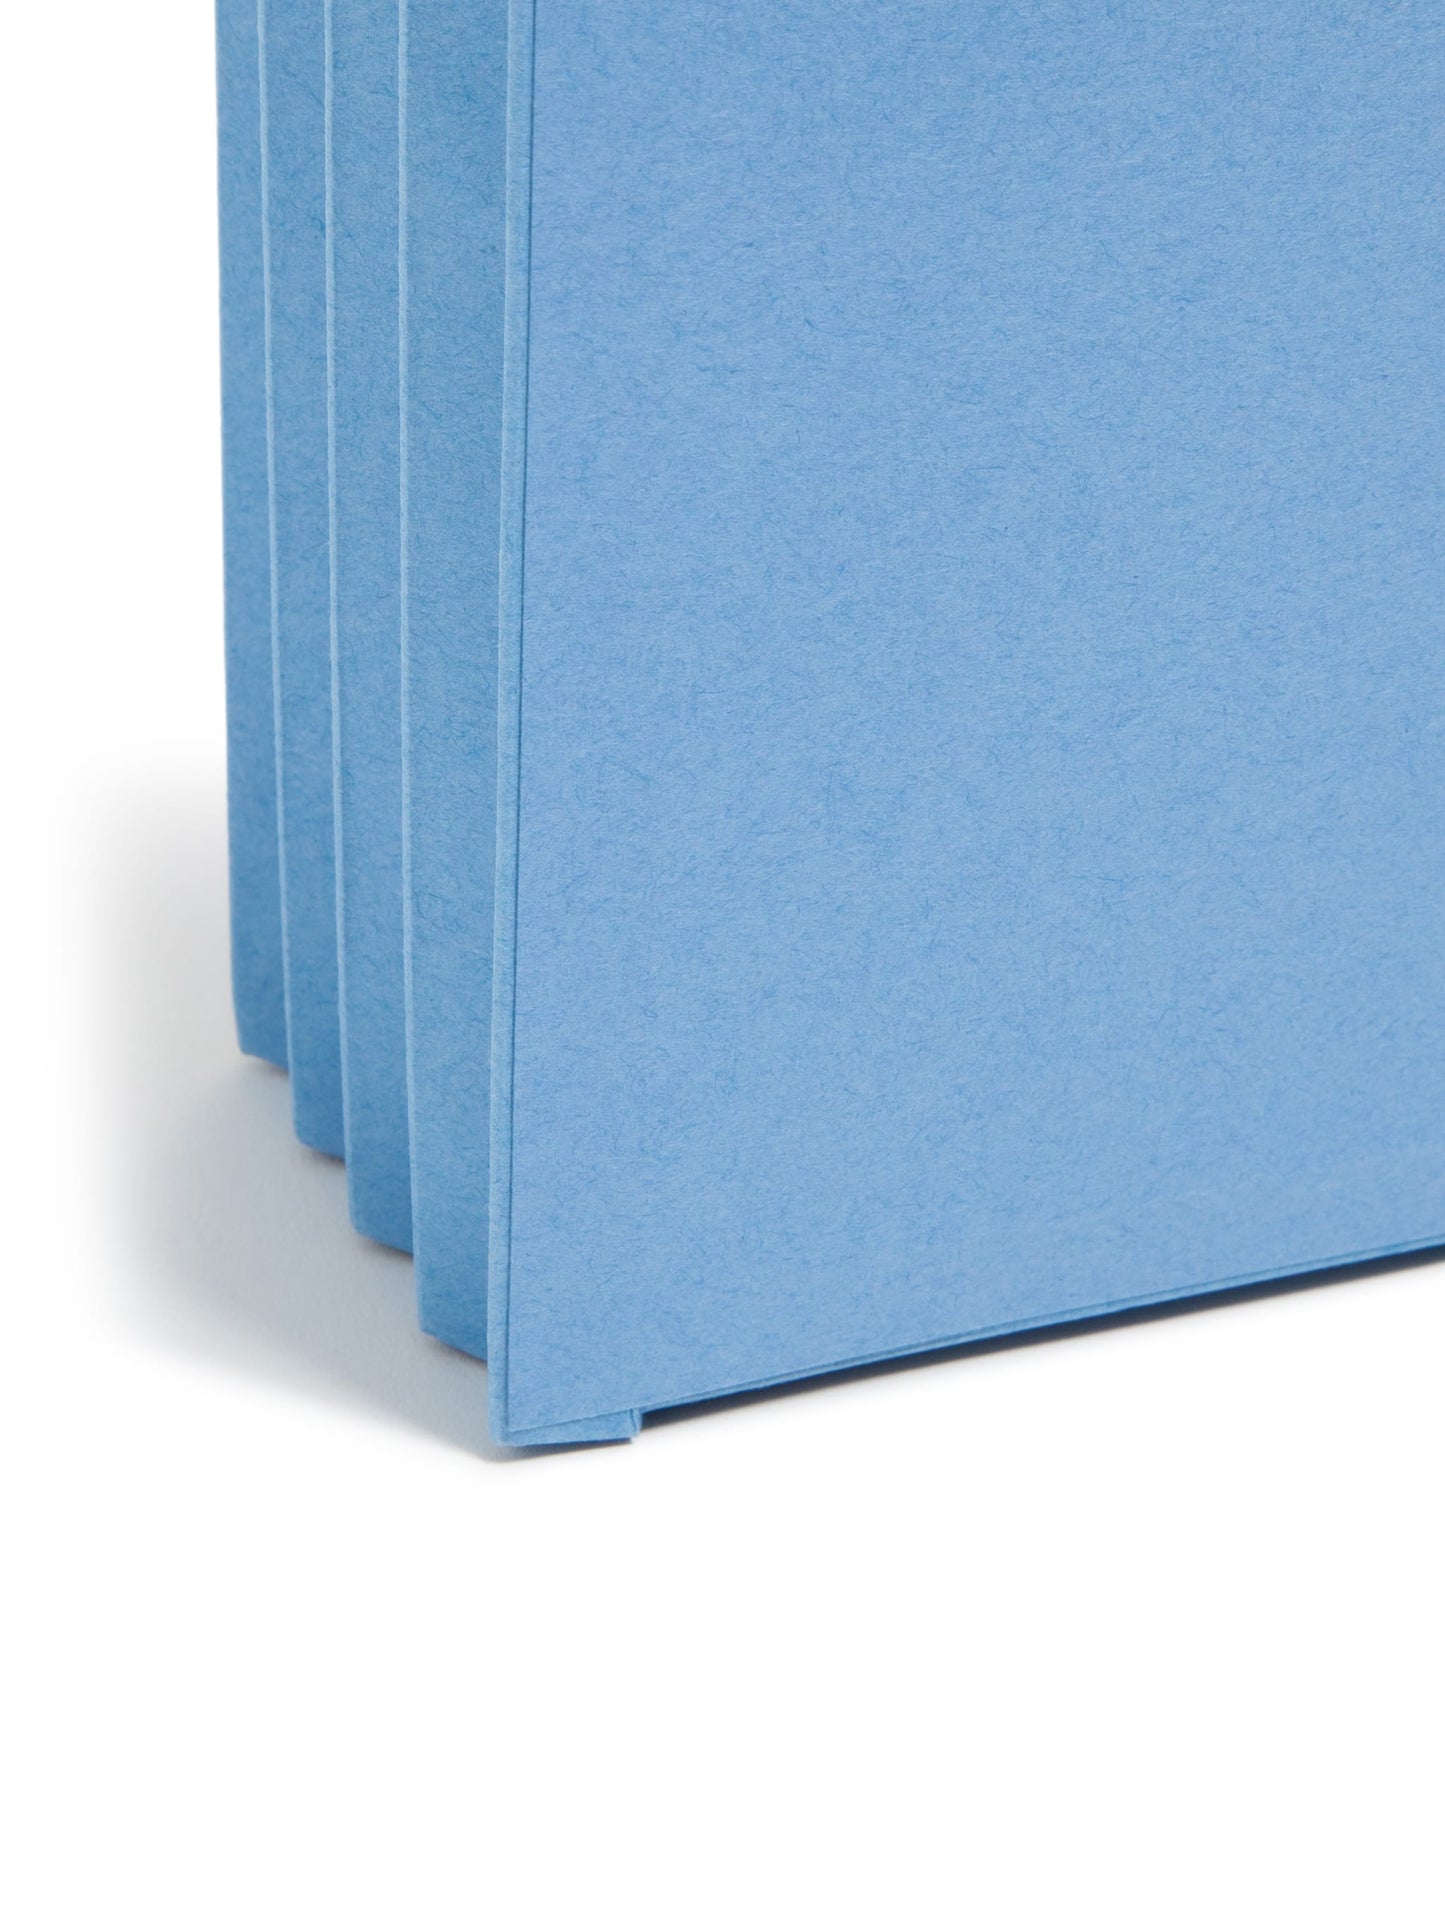 File Pockets, 3-1/2 inch Expansion, Straight-Cut Tab, Blue Color, Legal Size, Set of 0, 30086486742253